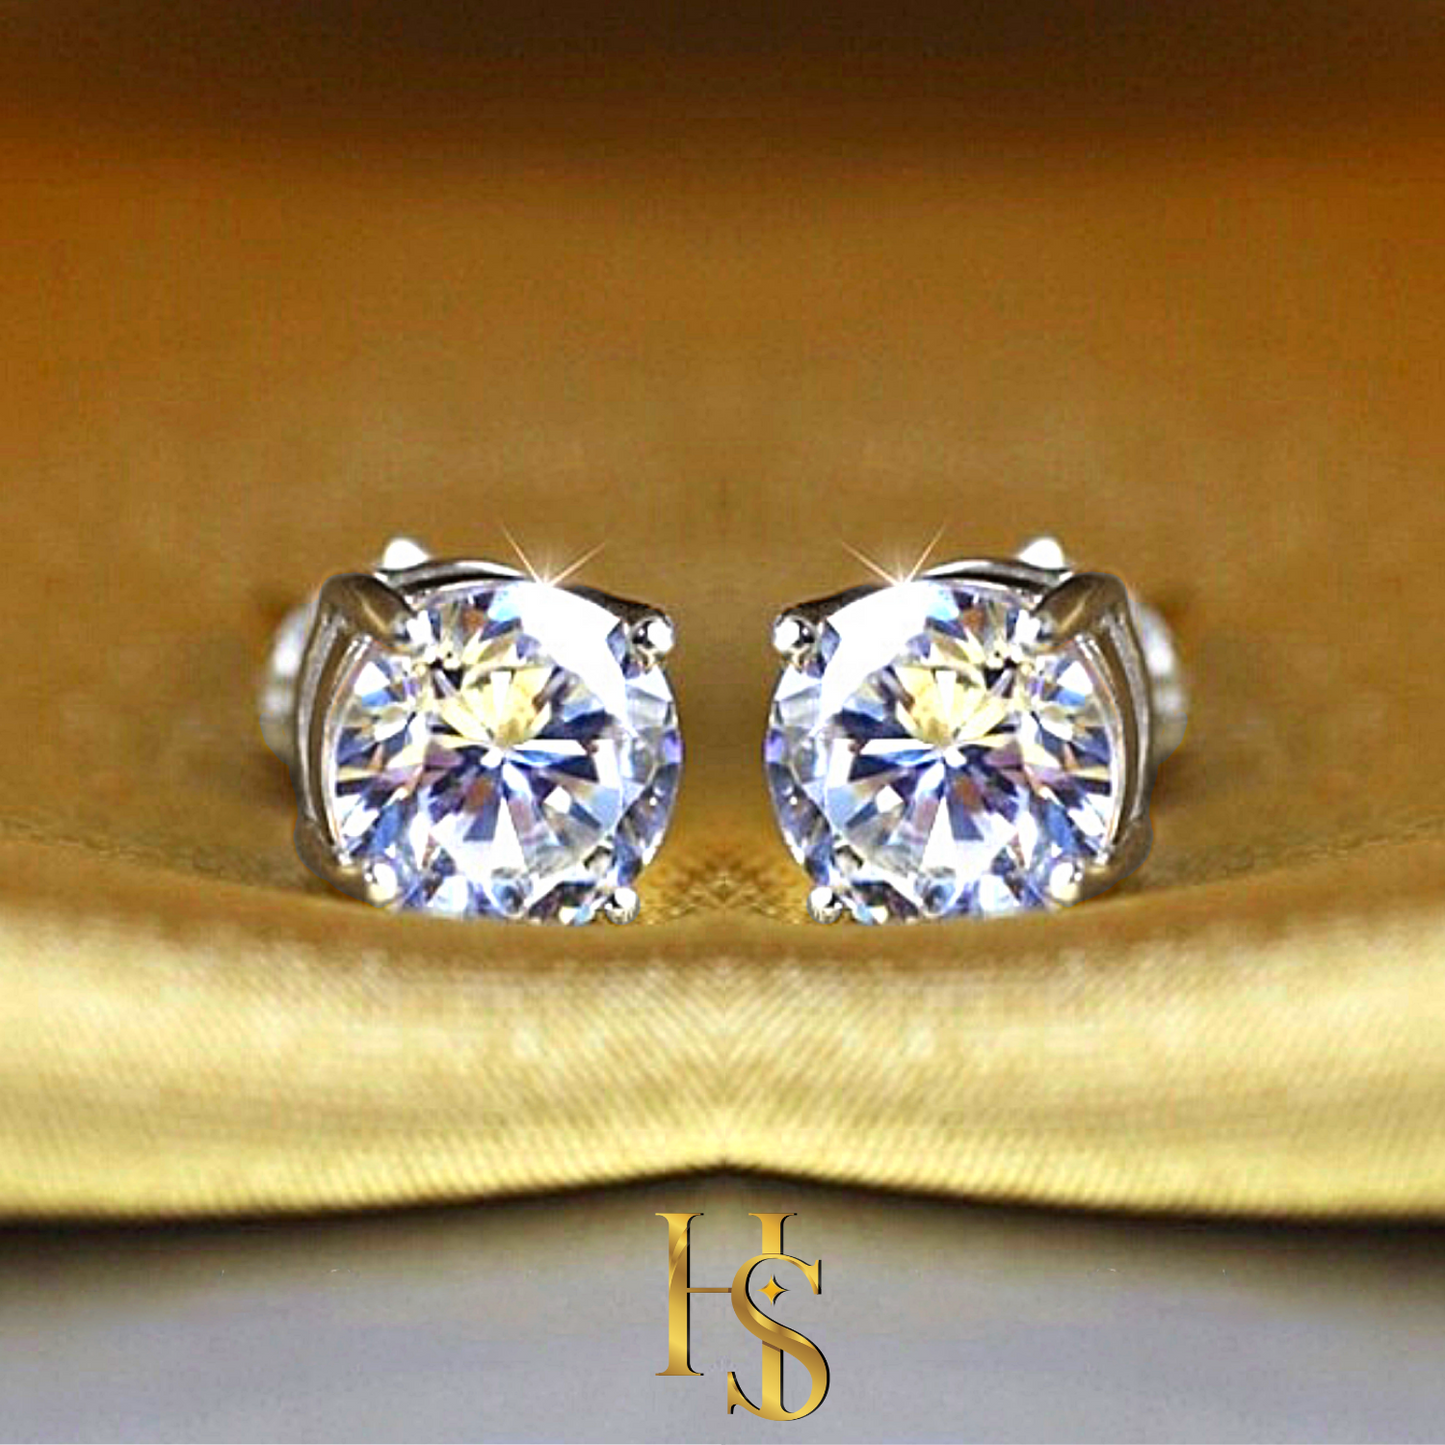 Solitaire Earrings in 92.5 Silver - Classic 4 prong setting embellished with Swarovski Zirconia